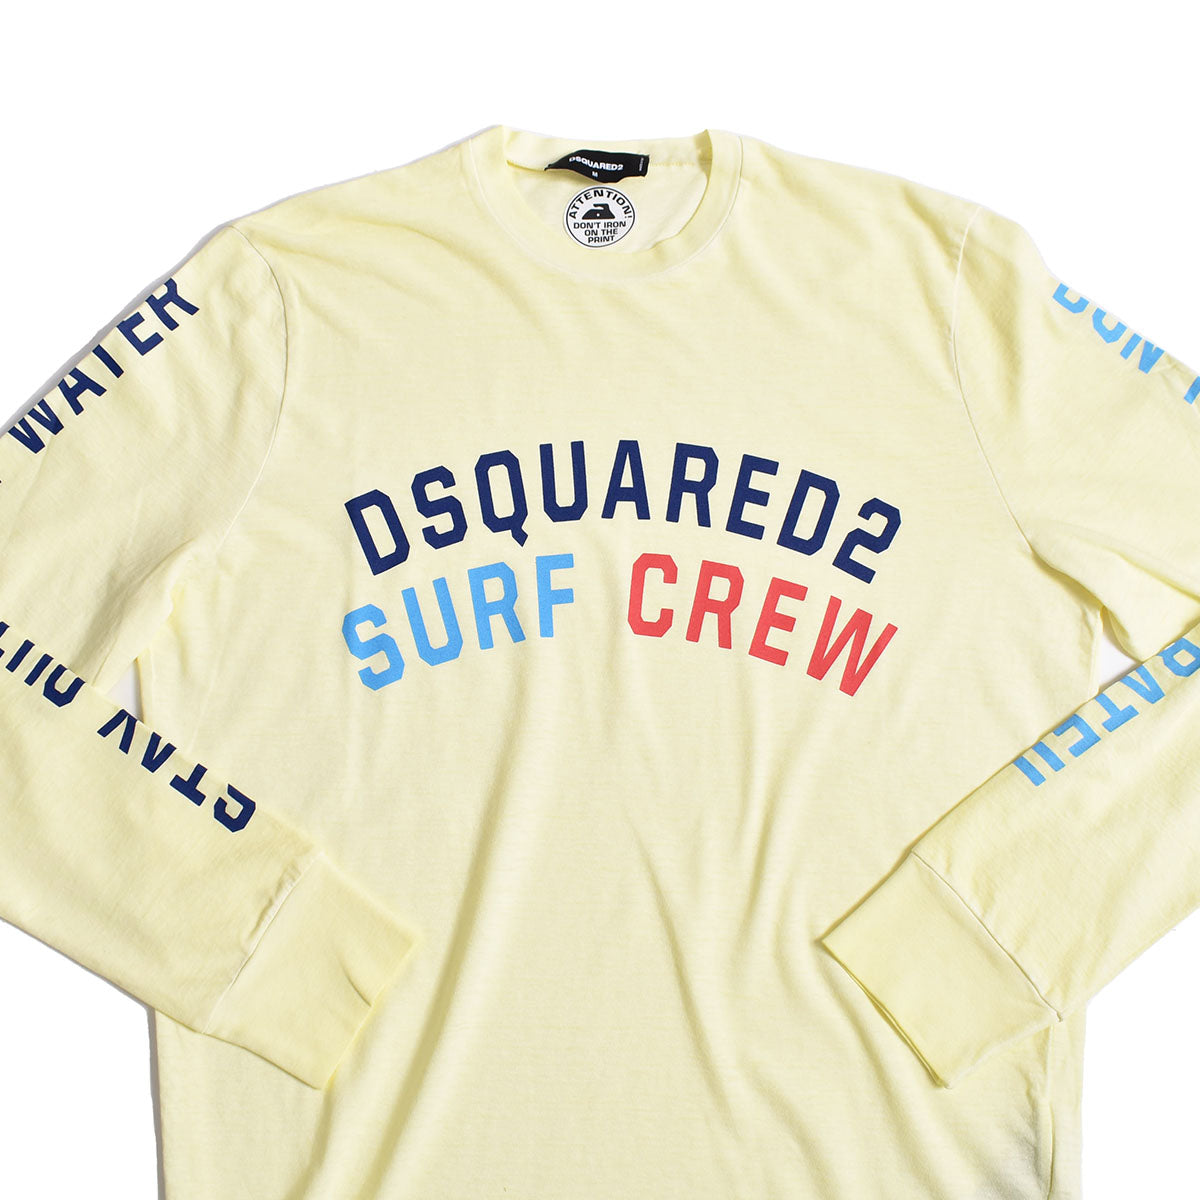 DSQUARED2]SURF CREW L/S T-SHIRT/YELLOW(S74GD1133) – R&Co.